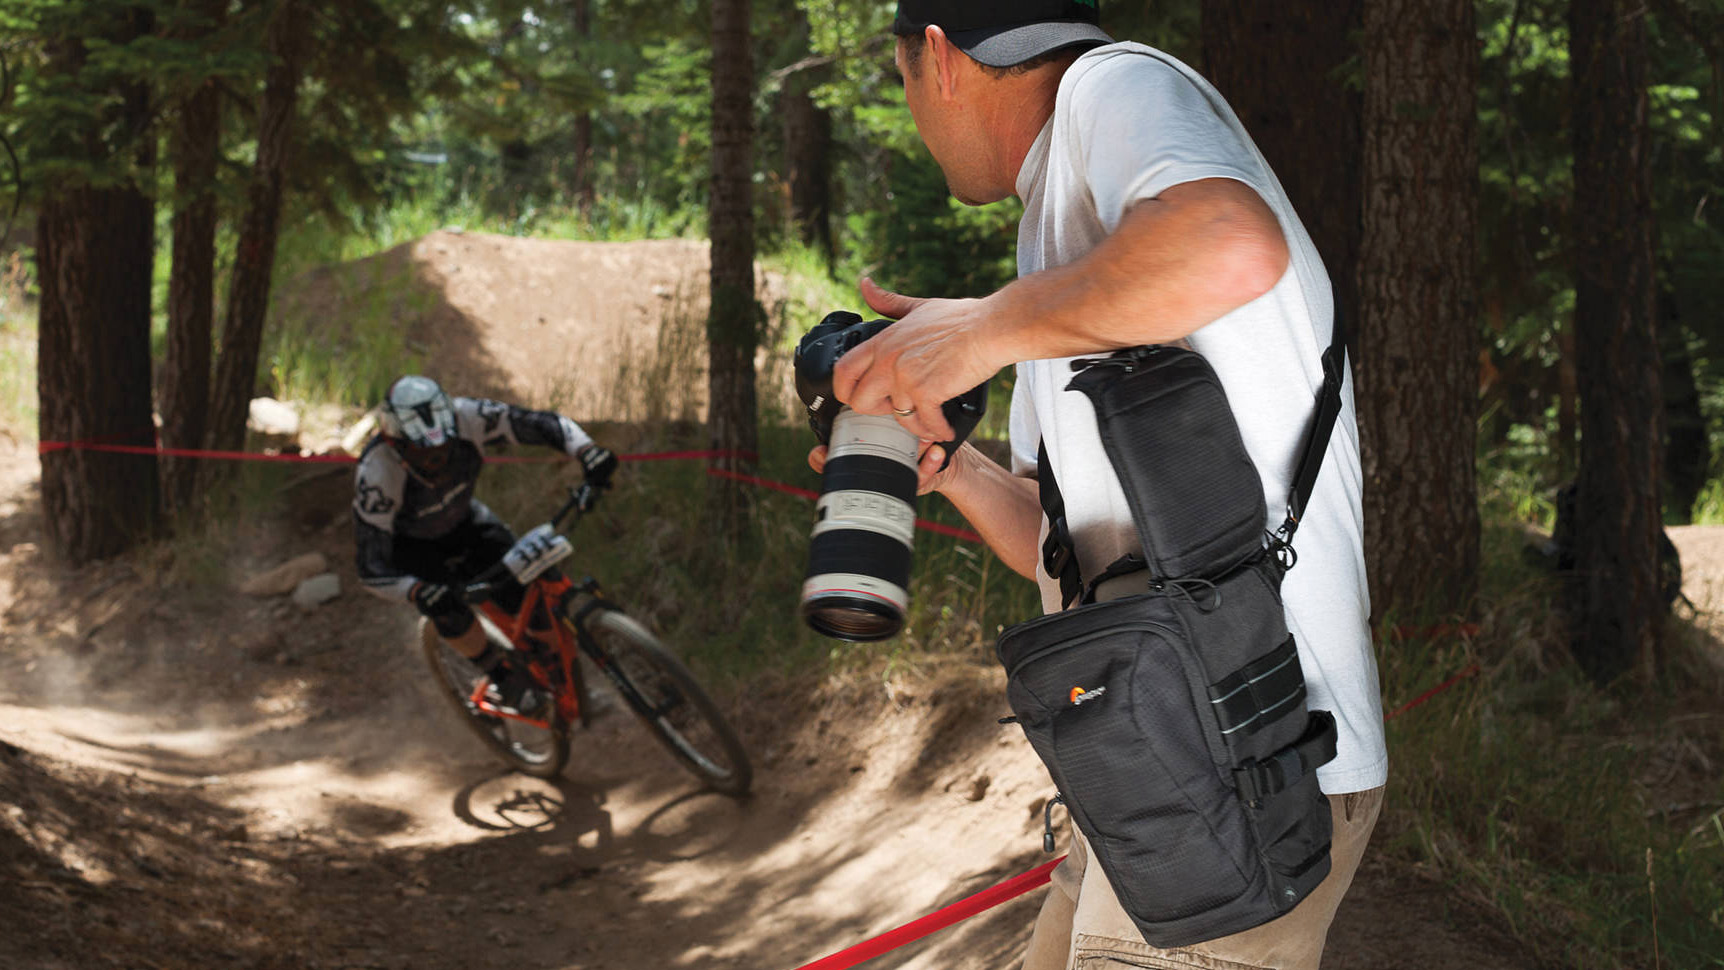 Affordable and Unexpected: Manfrotto Street Waist Bag Review